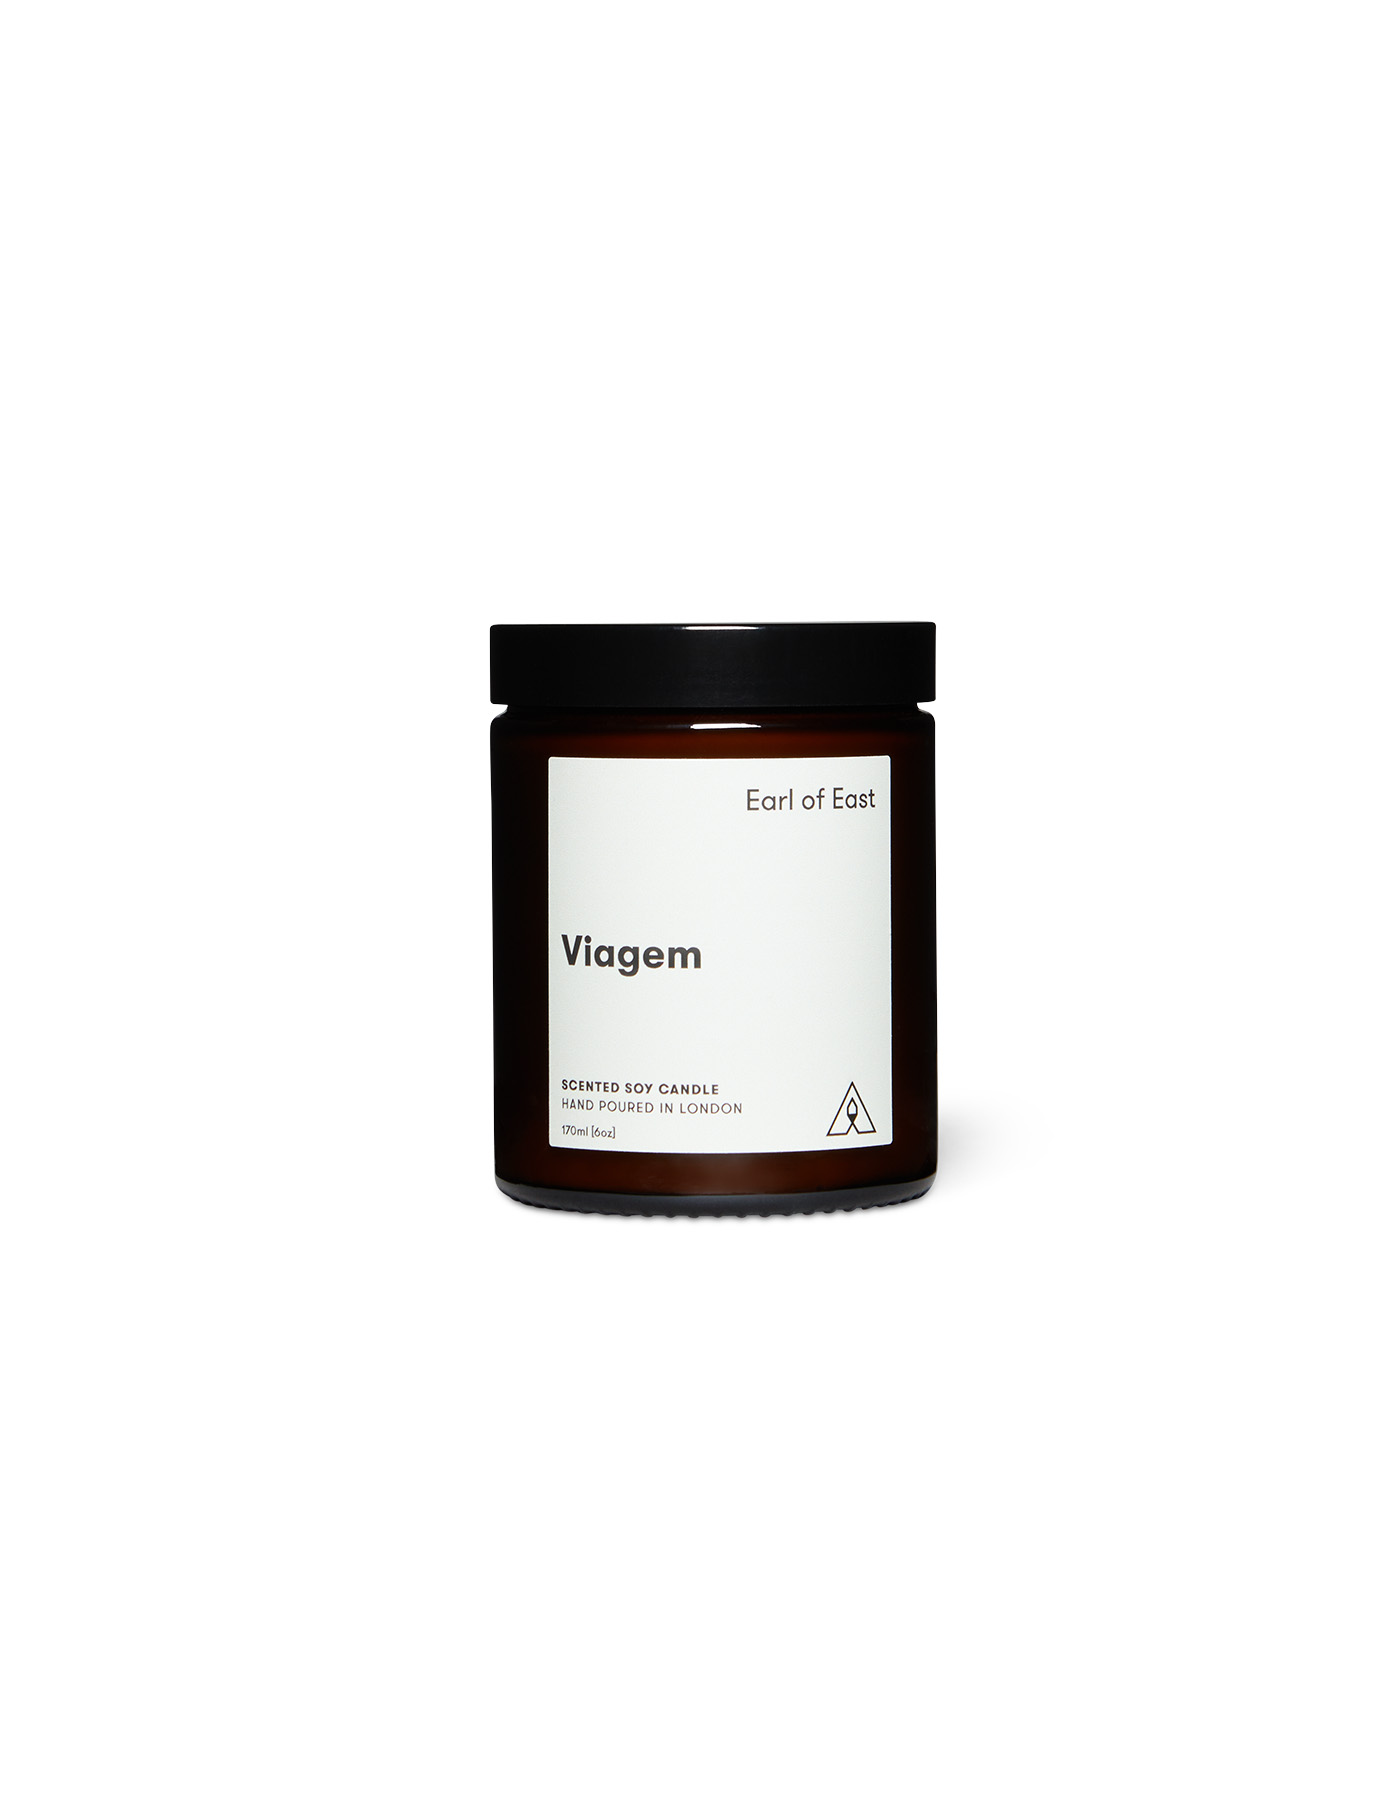 Earl of East London Viagem Soy Wax Candle